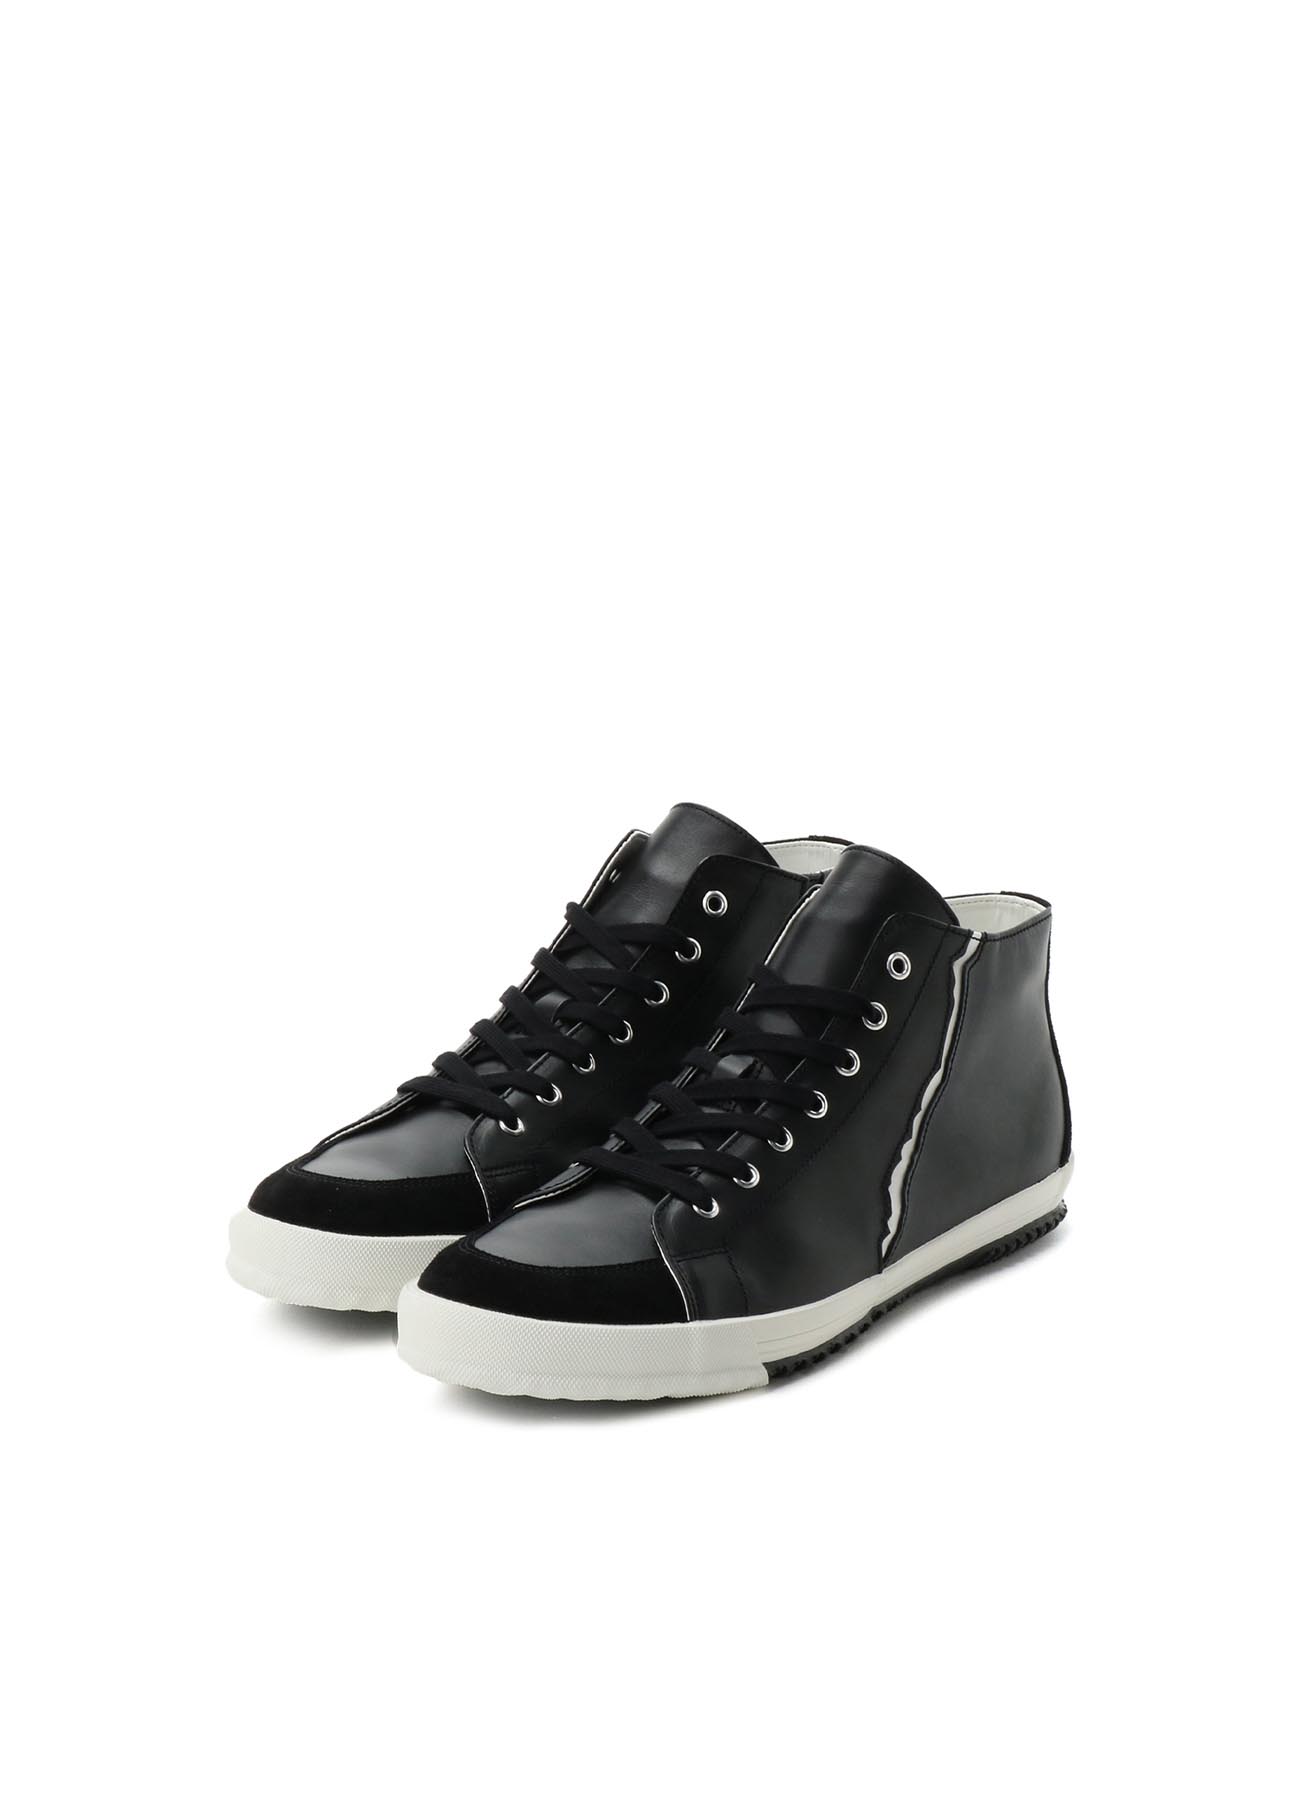 COWHIDE COMBINATION CRACK MIDDLE SNEAKERS